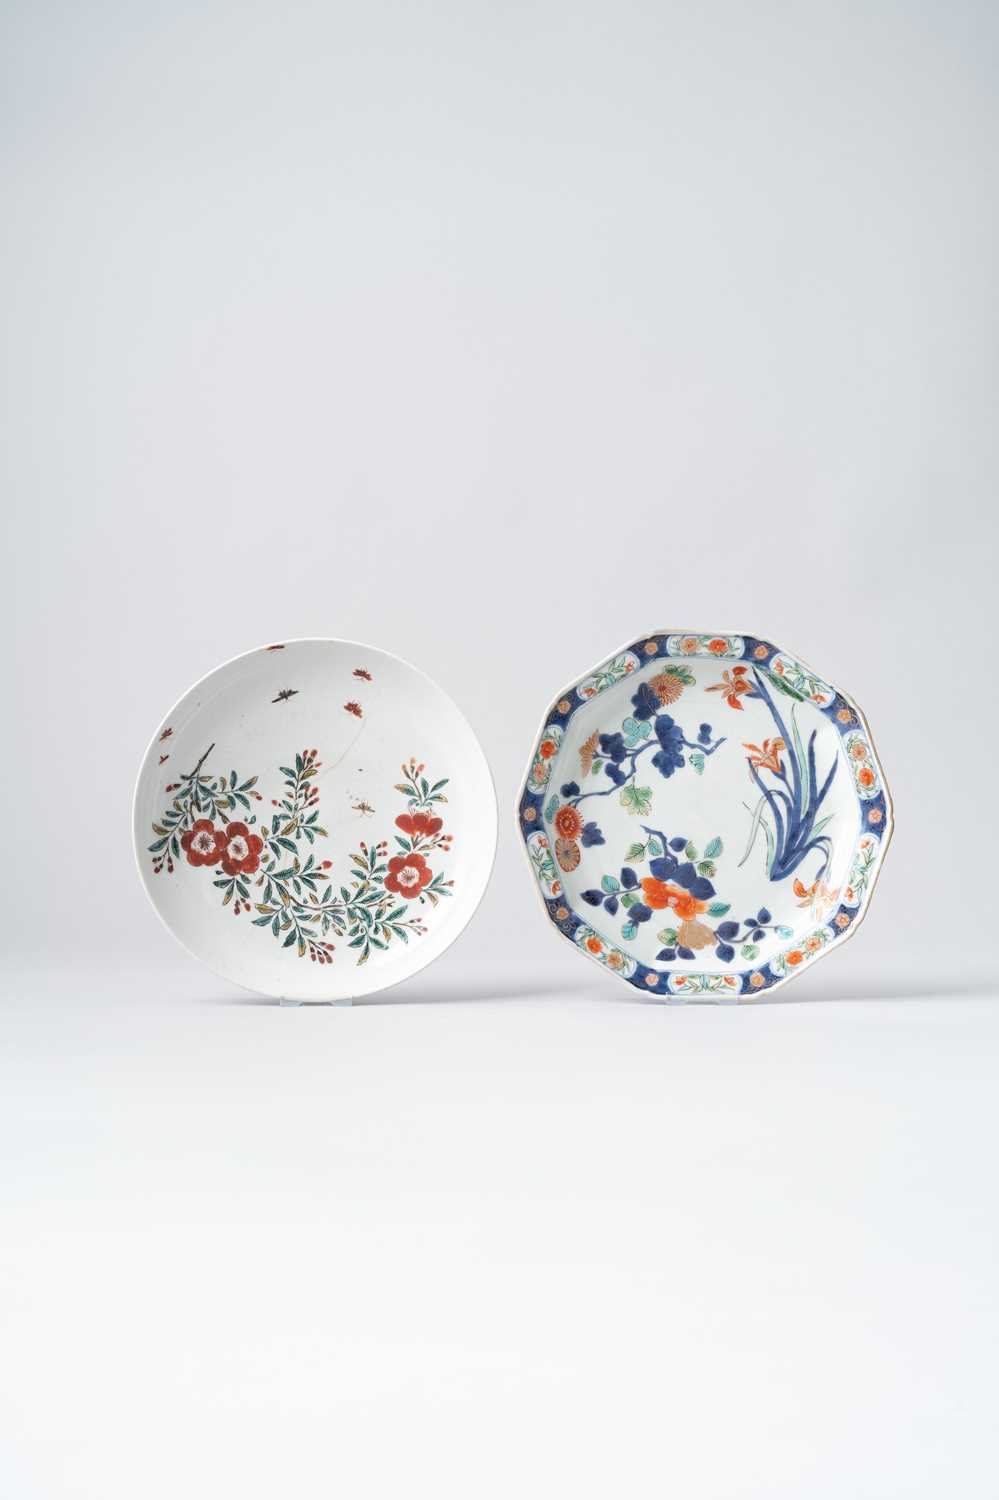 NO RESERVE TWO JAPANESE ARITA POLYCHROME DISHES EDO PERIOD, 17TH AND 18TH CENTURY Both decorated